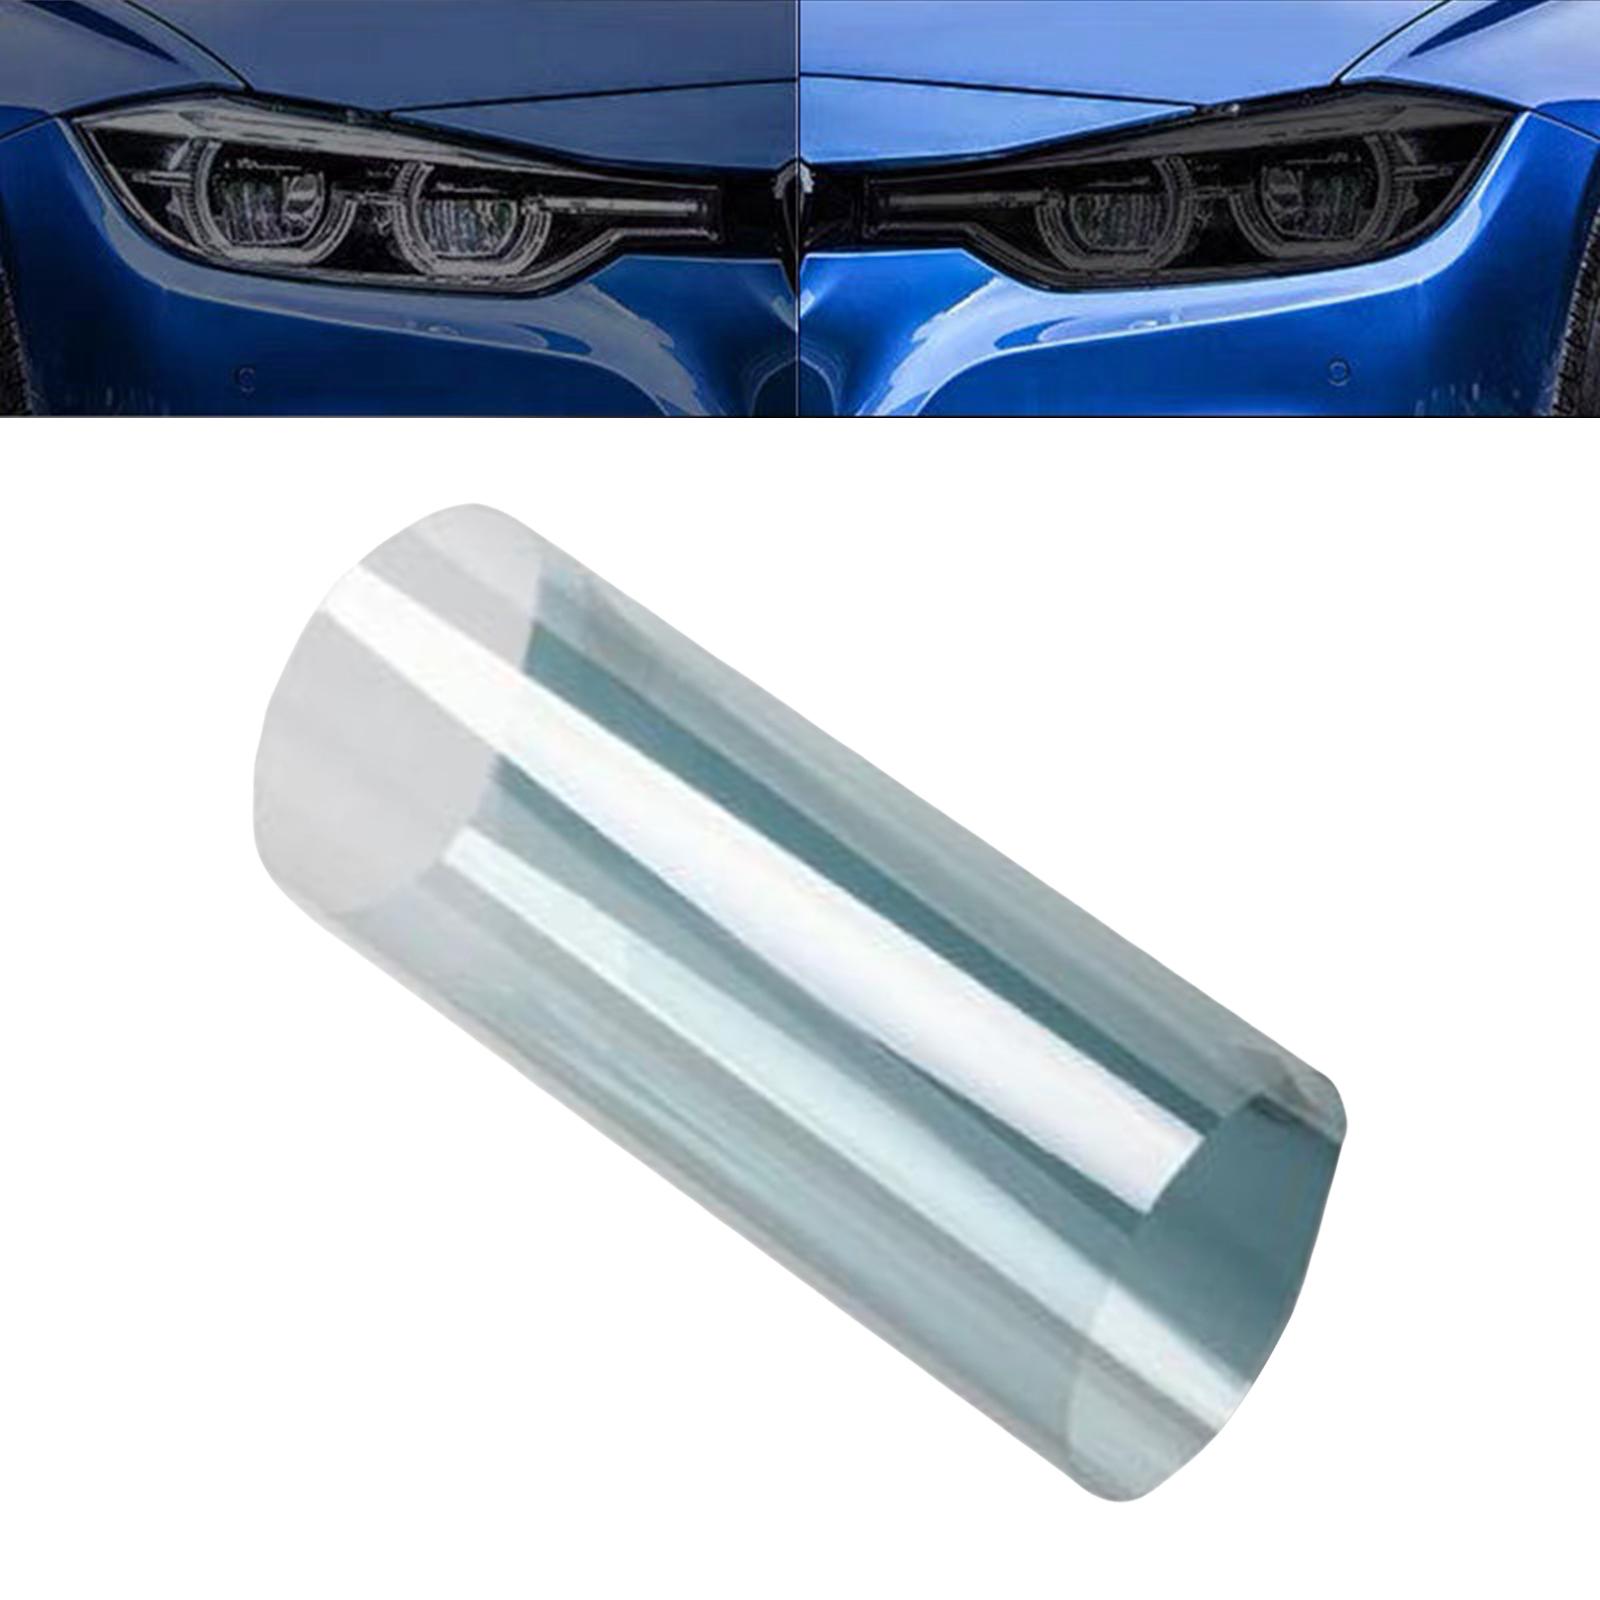 Headlight Protection Film Universal Car Paint Protection Film Invisible